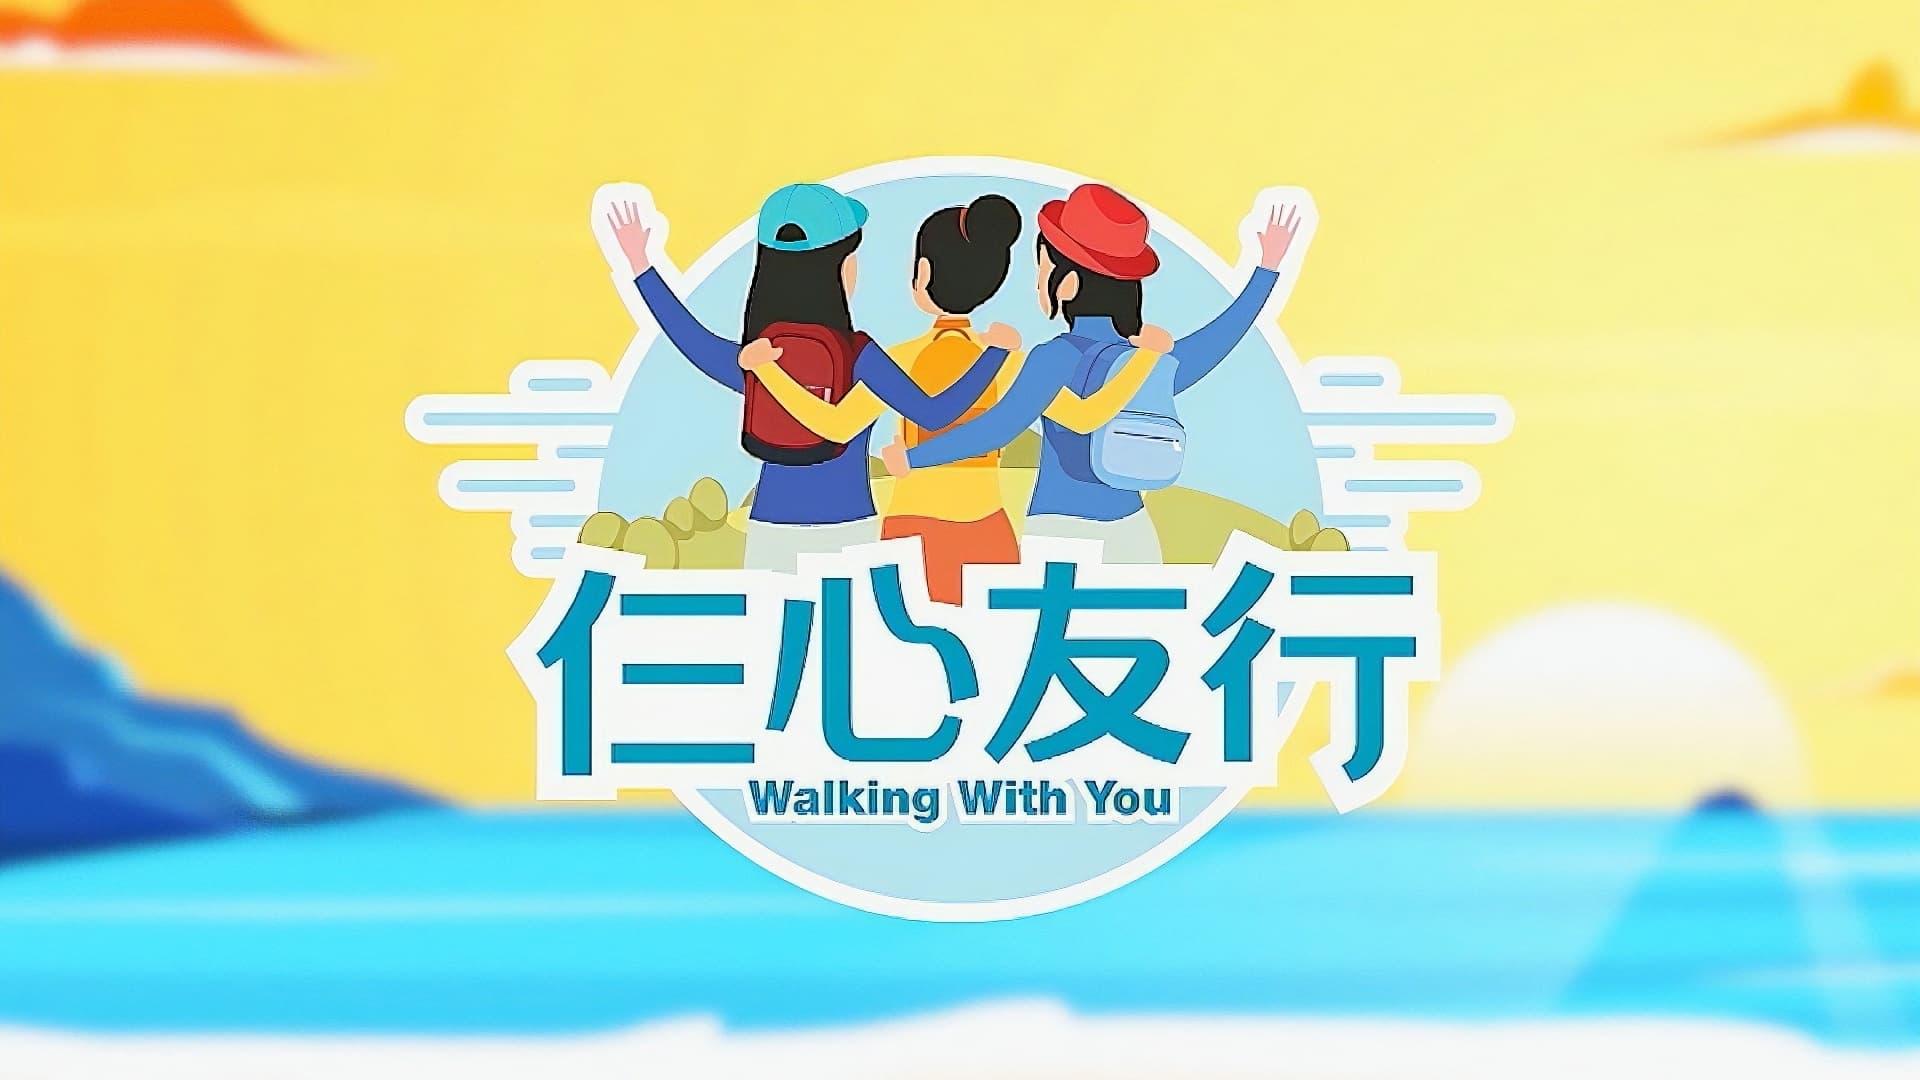 Walking With You backdrop